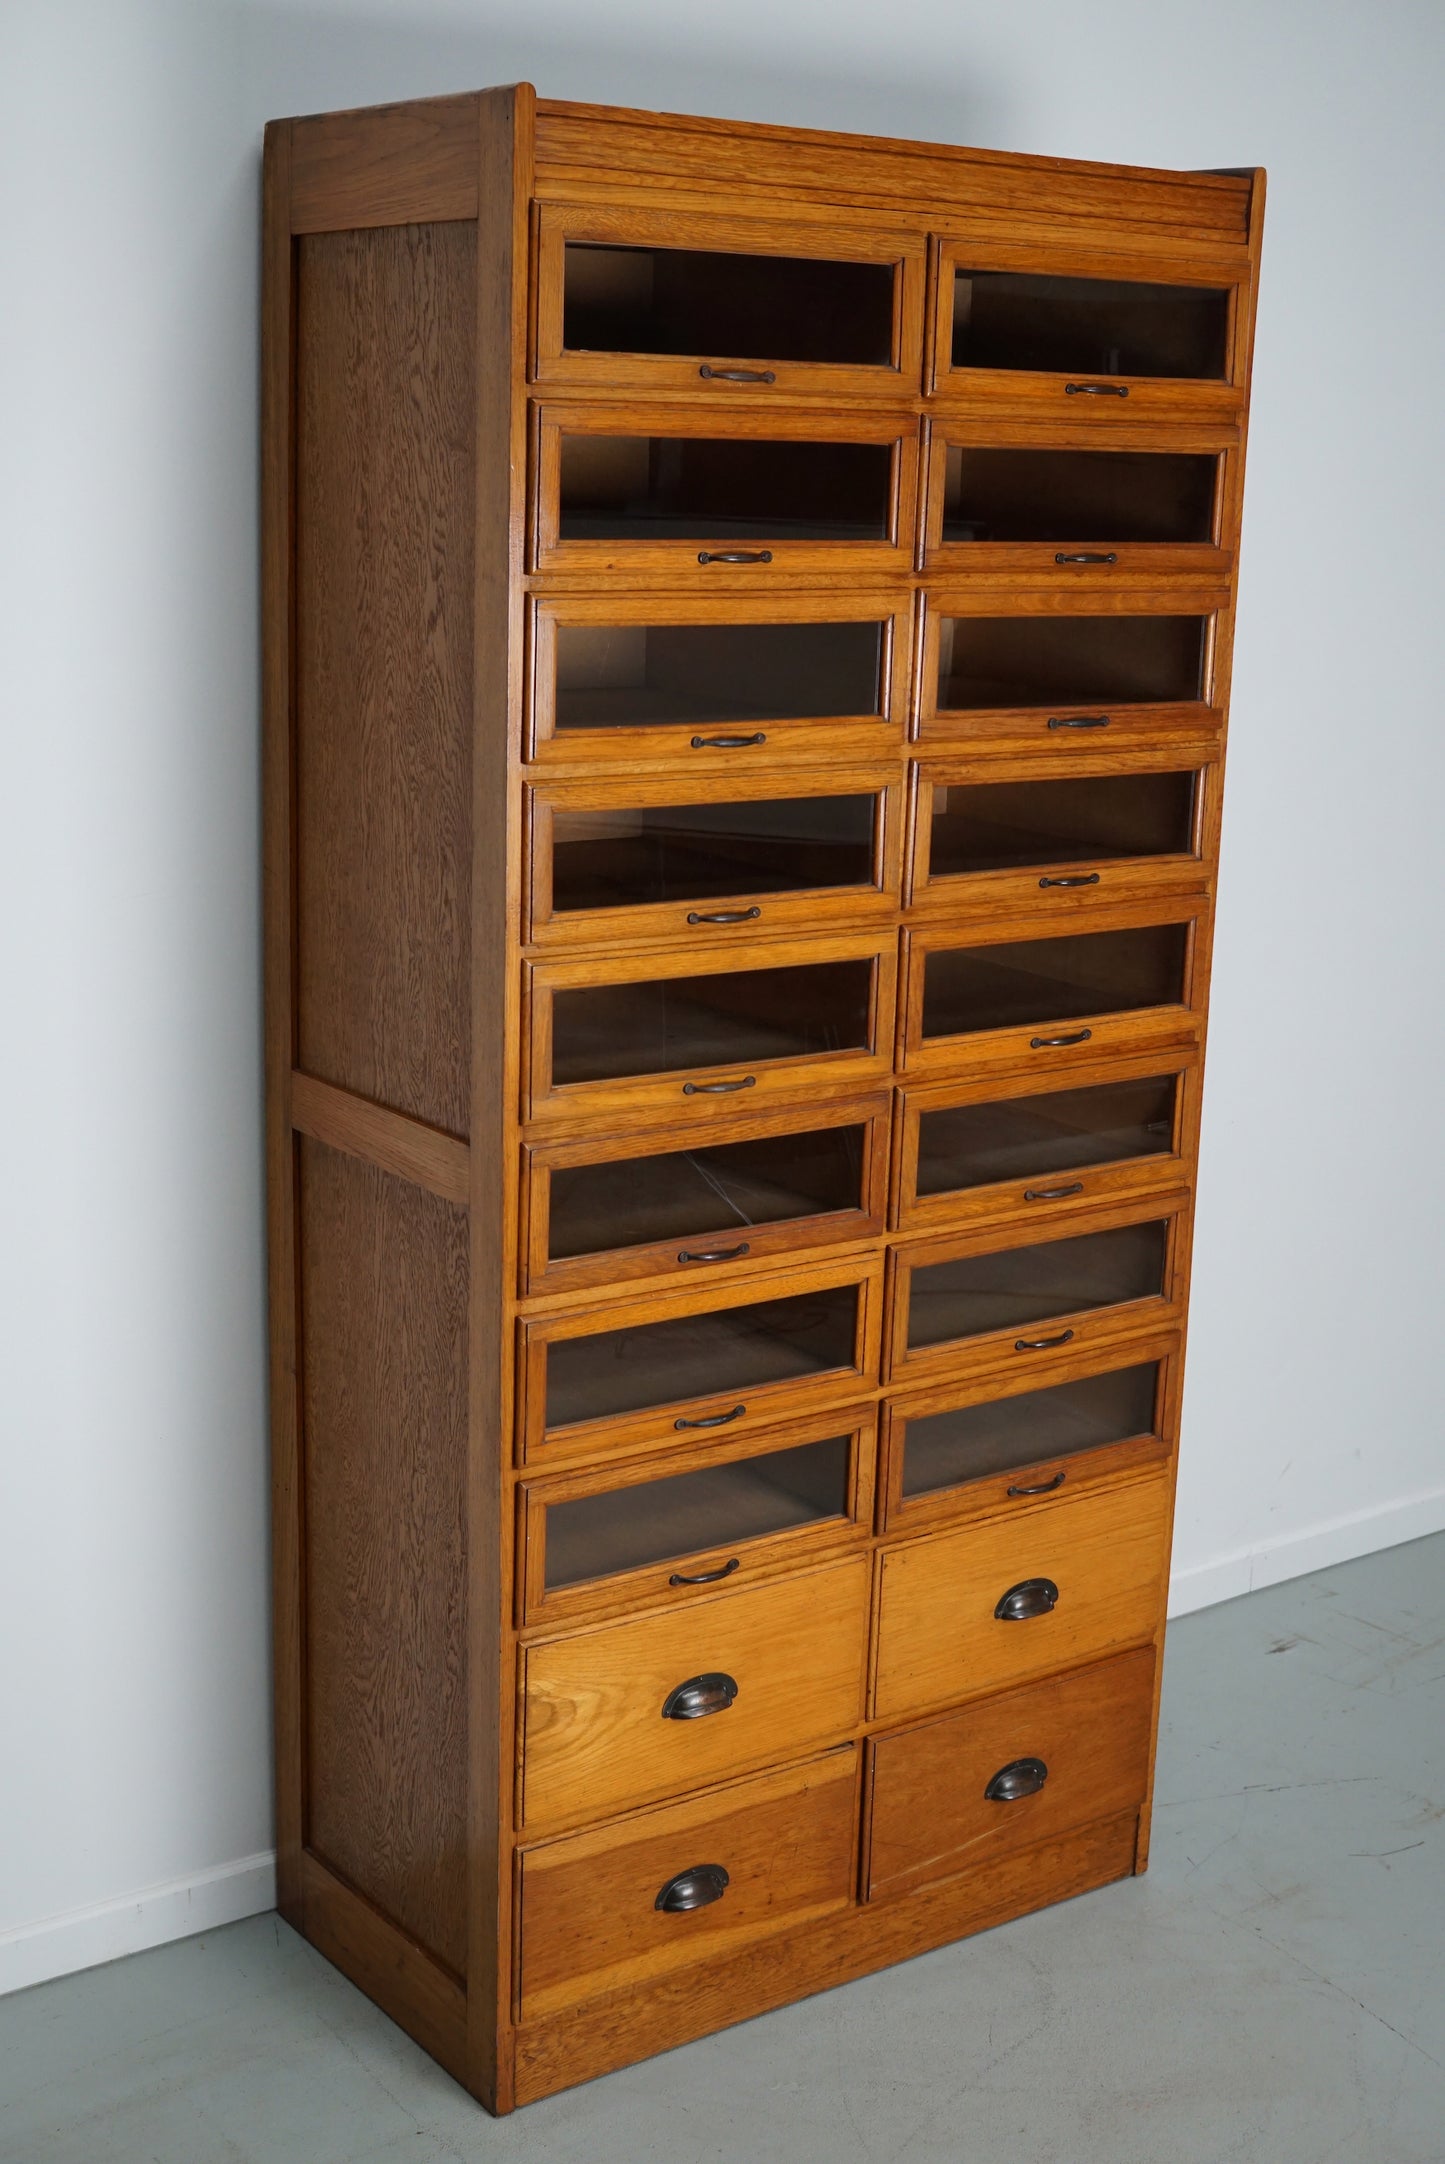 English Haberdashery Shop Cabinet with Glass Fronted Drawers, Circa 1930s